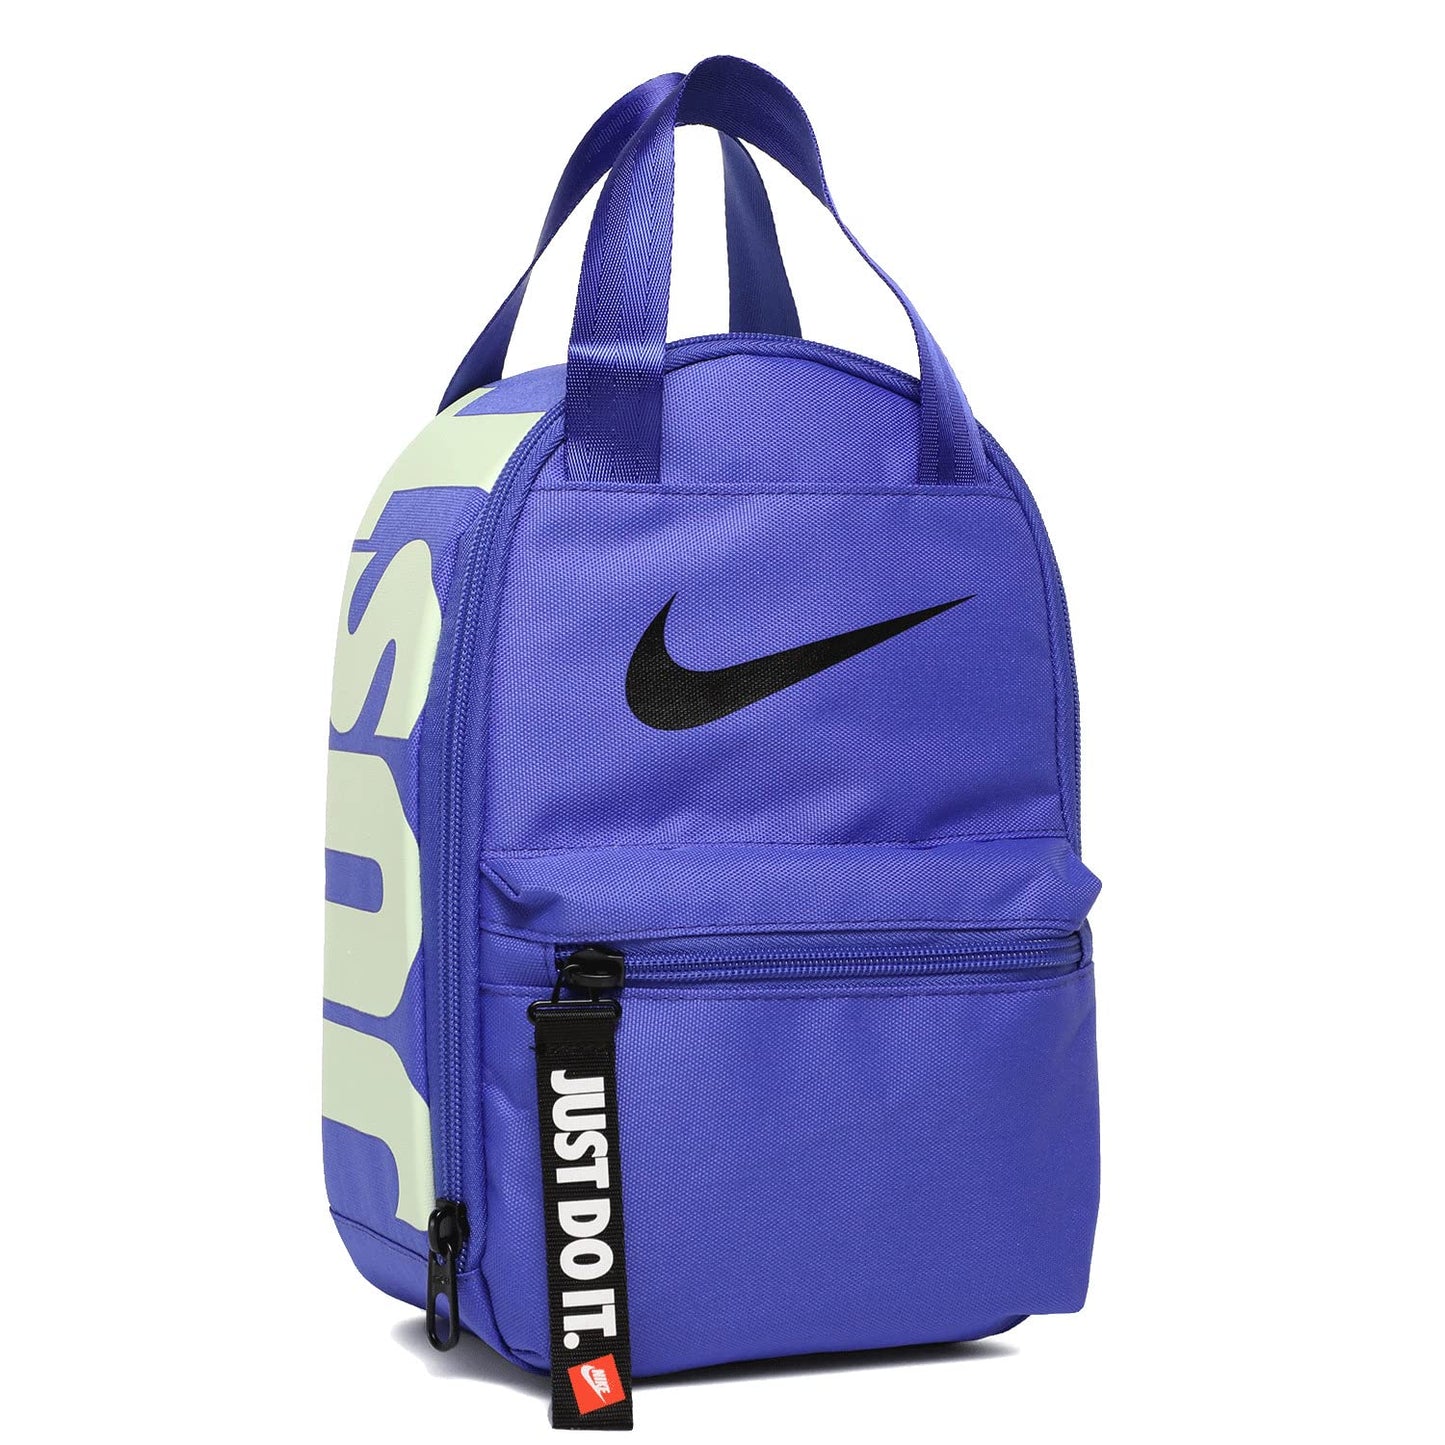 Image 1 of JDI Zip Pull Lunch Bag